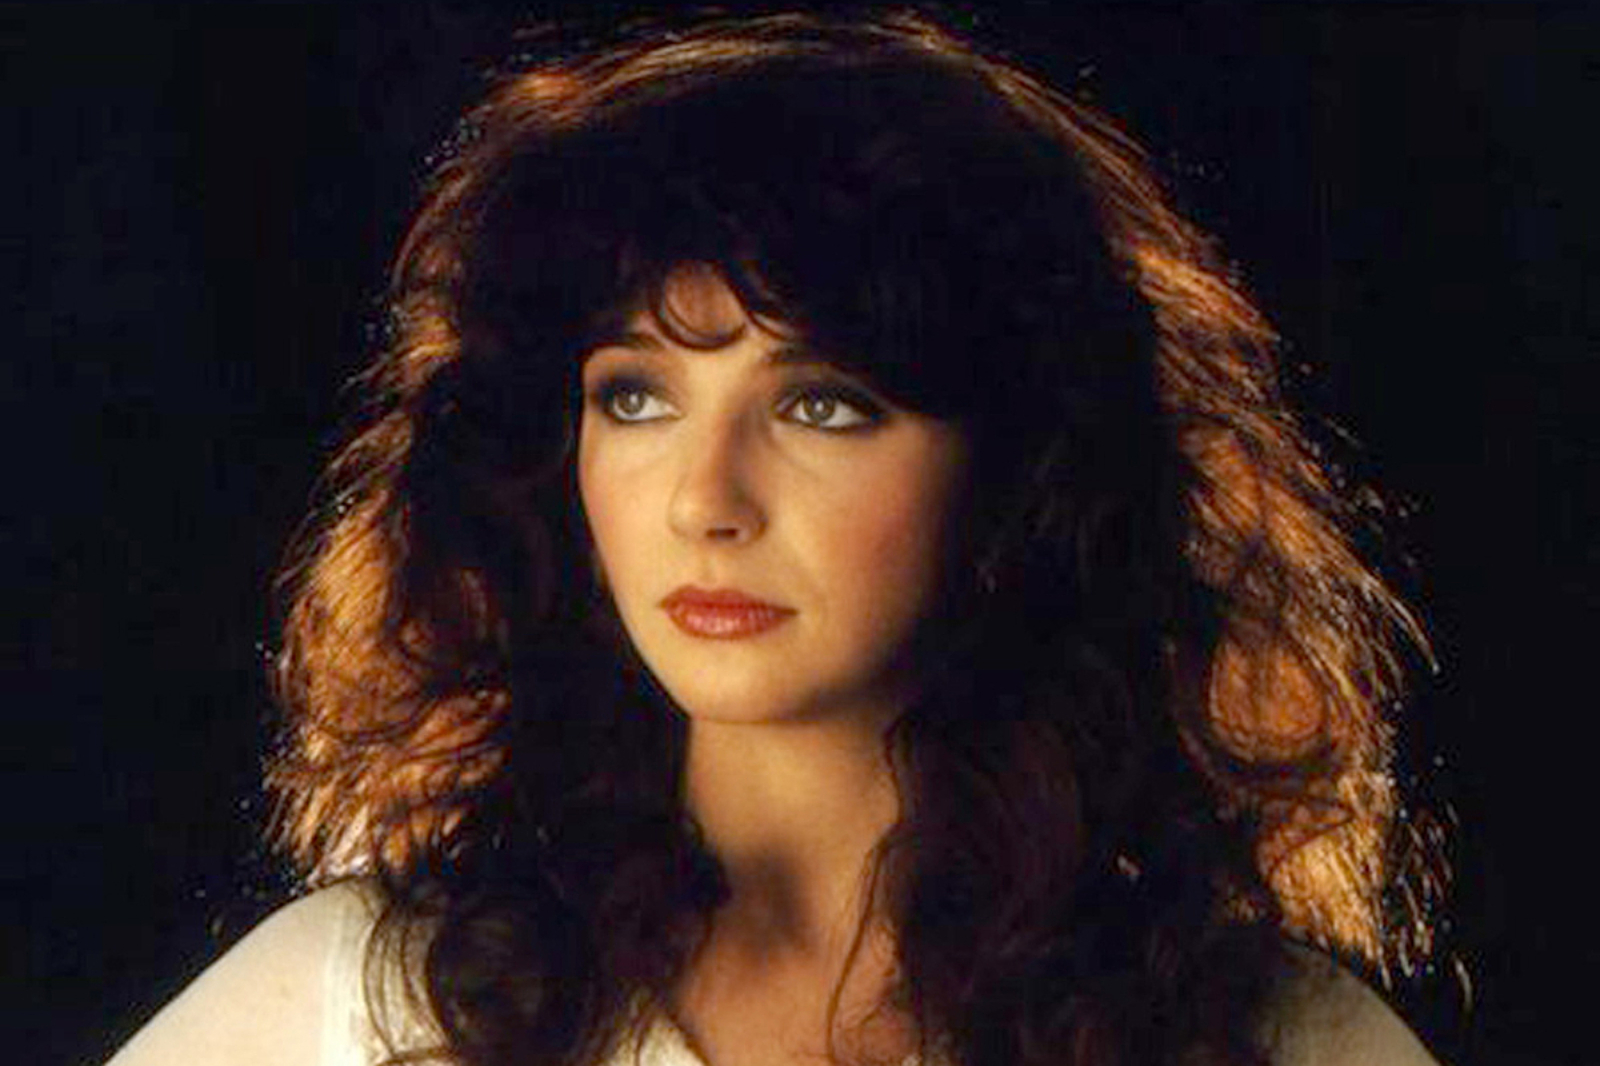 Kate Bush is releasing a live album of her Before The Dawn gigs